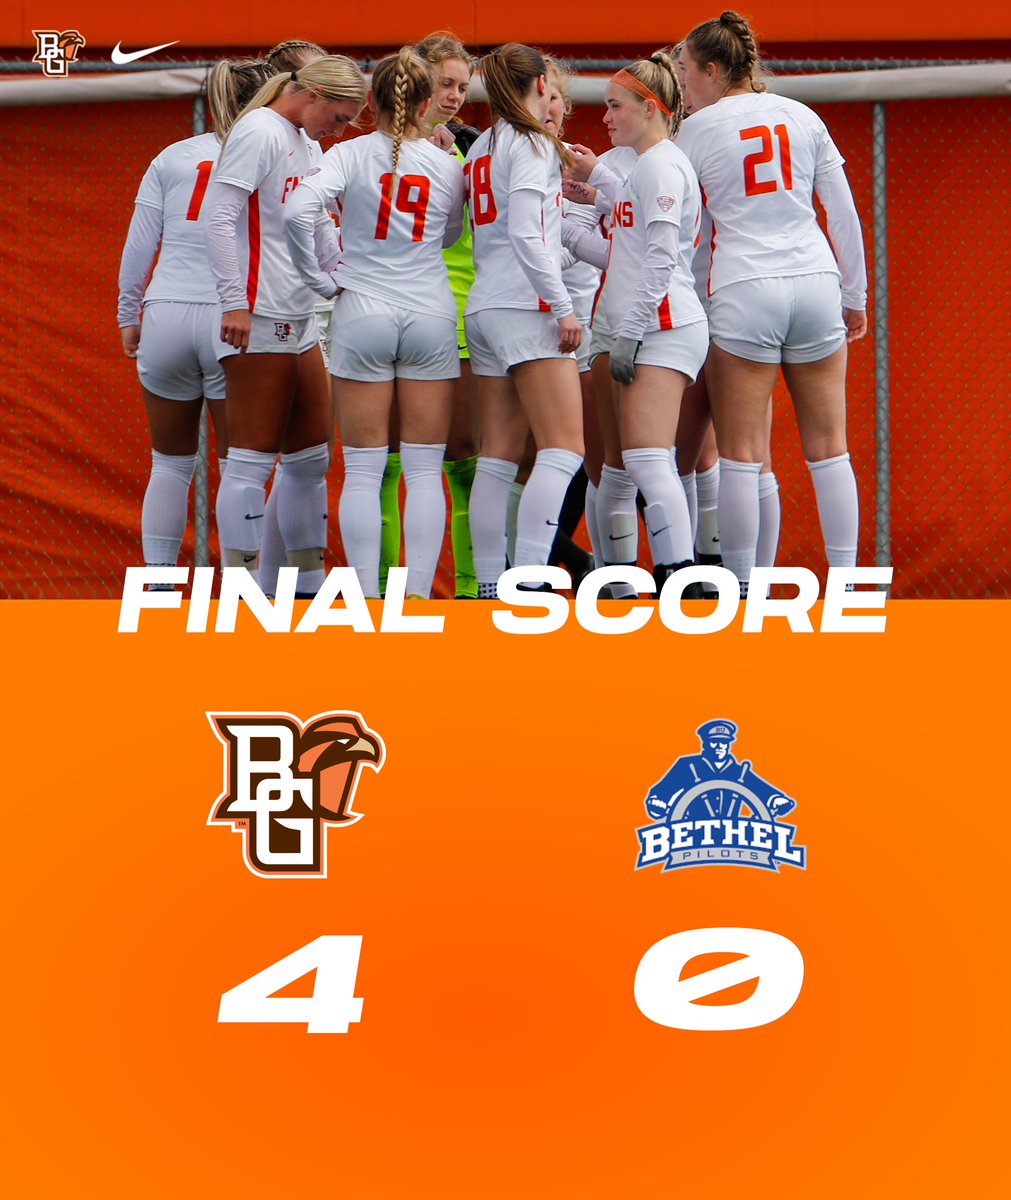 A great day for soccer and a win! Falcons head into a small break before we head down to Kentucky for a Sunday matchup at 4:00 pm on April 7! 📸 | Drake Harlett from @BG_FMSN #AyZiggy